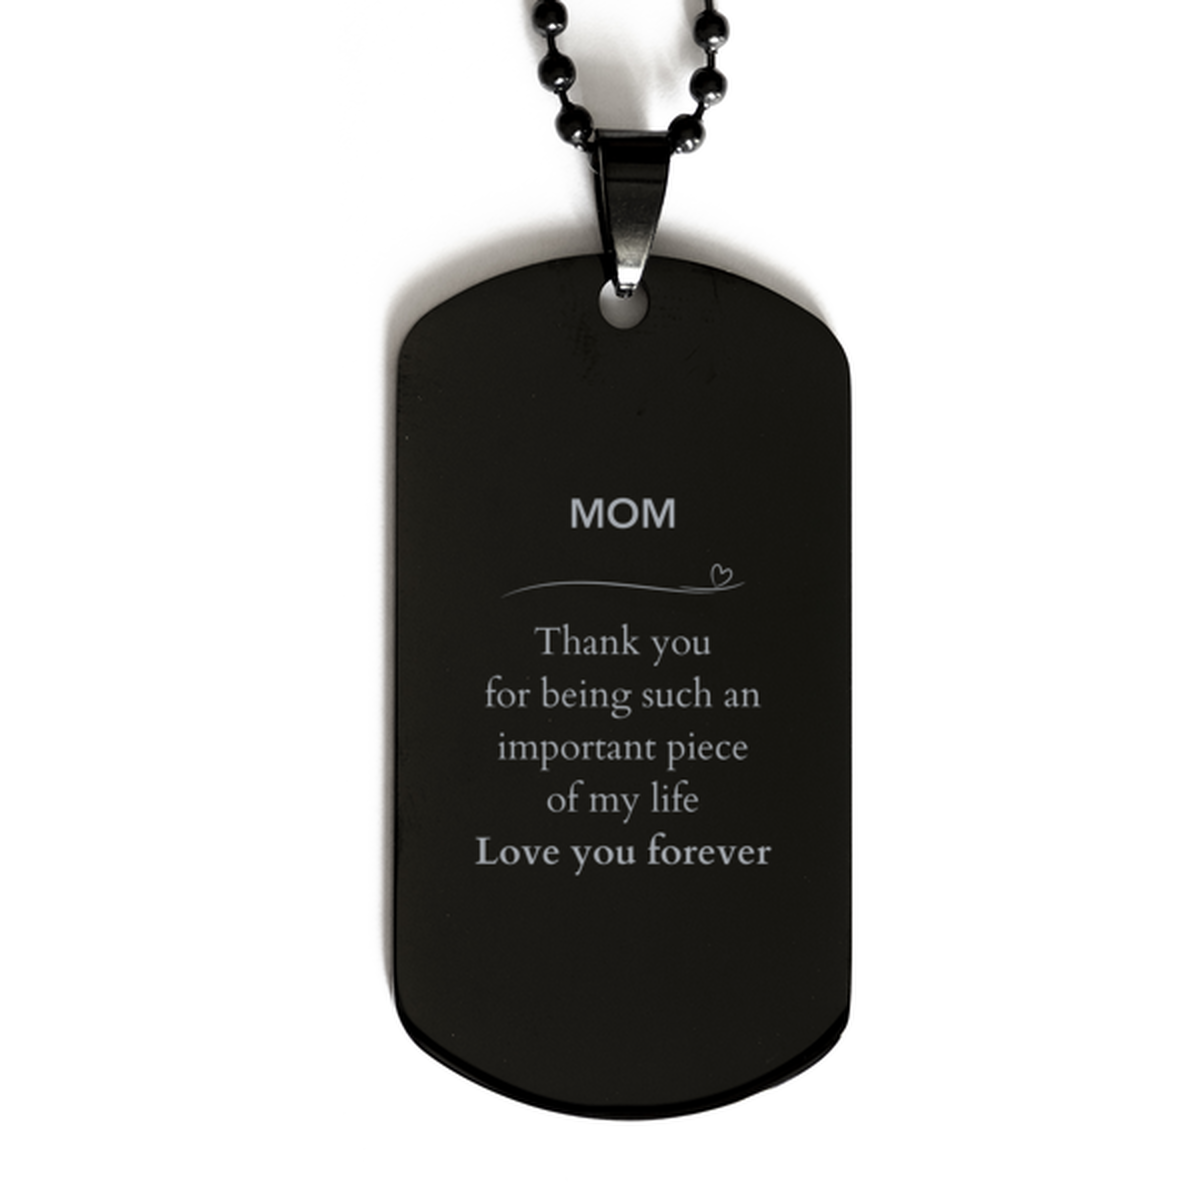 Appropriate Mom Black Dog Tag Epic Birthday Gifts for Mom Thank you for being such an important piece of my life Mom Christmas Mothers Fathers Day